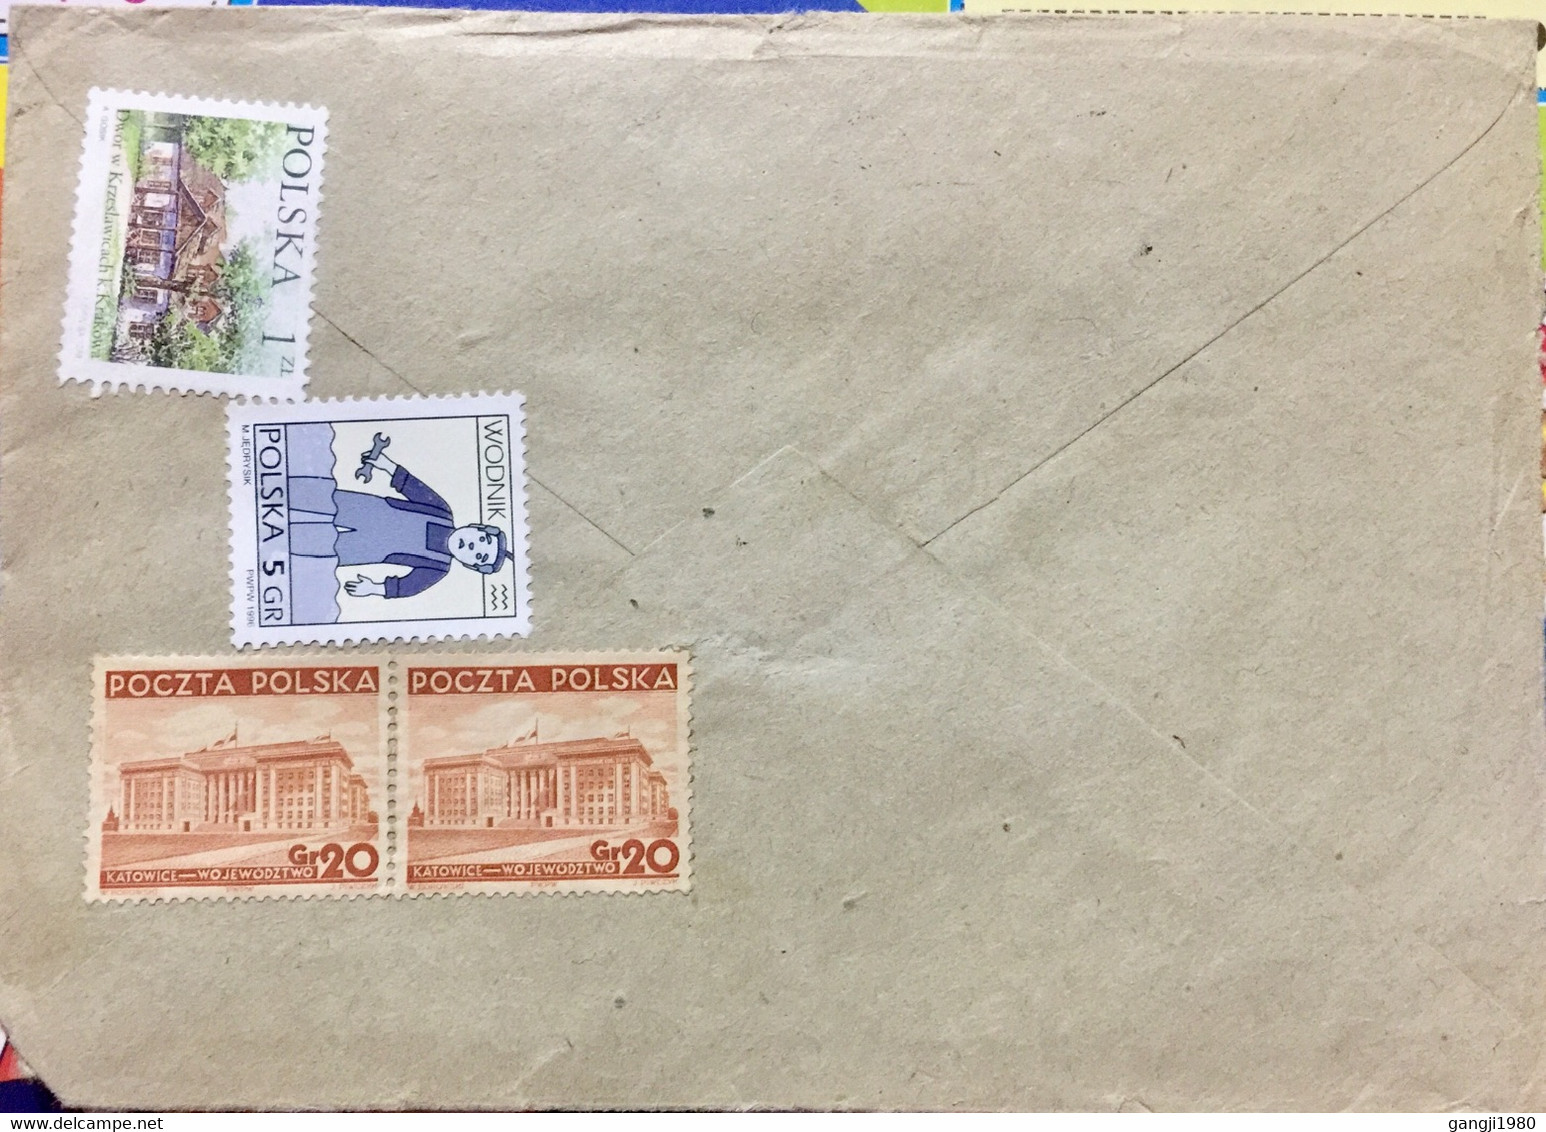 POLAND 2000, USED AIRMAIL COVER TO INDIA 4 DIFFERENT 1958 PICTURAL SPECIAL CANCELLATION, KATOWIDE ,HOUSE MUSIC,BUILDIN, - Covers & Documents